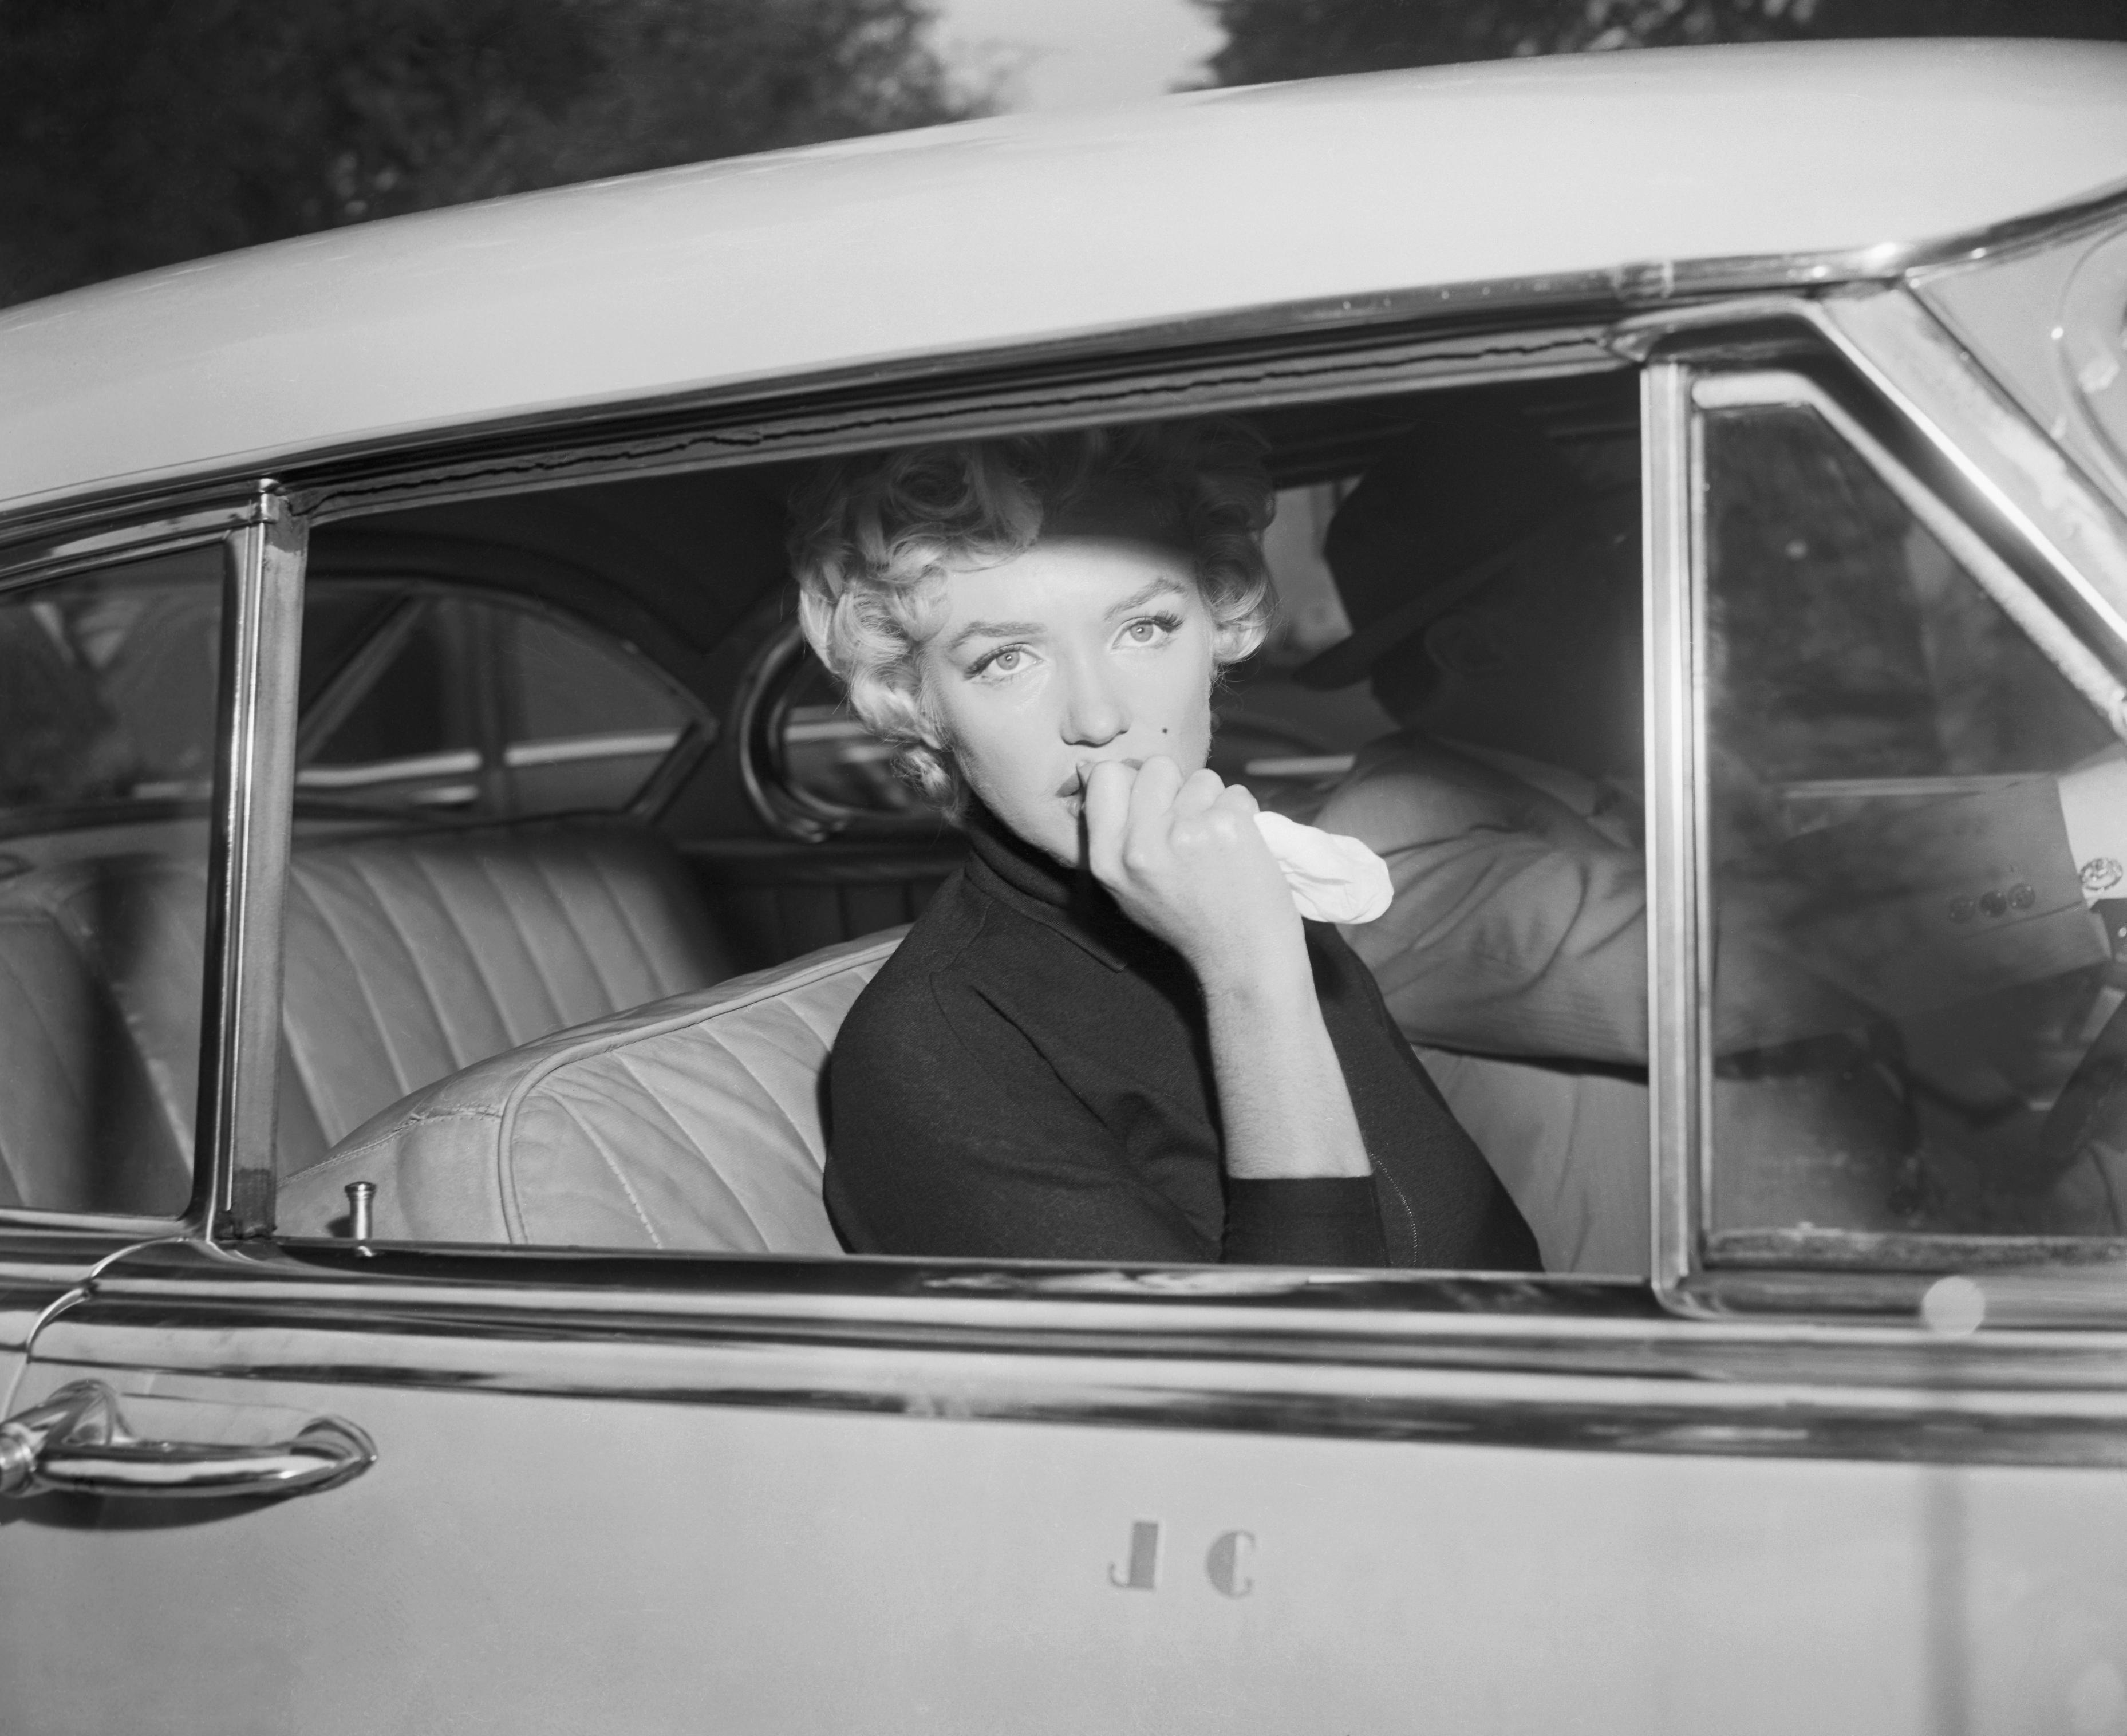 Marilyn Monroe photographed leaving home in 1954. | Source: Getty Images